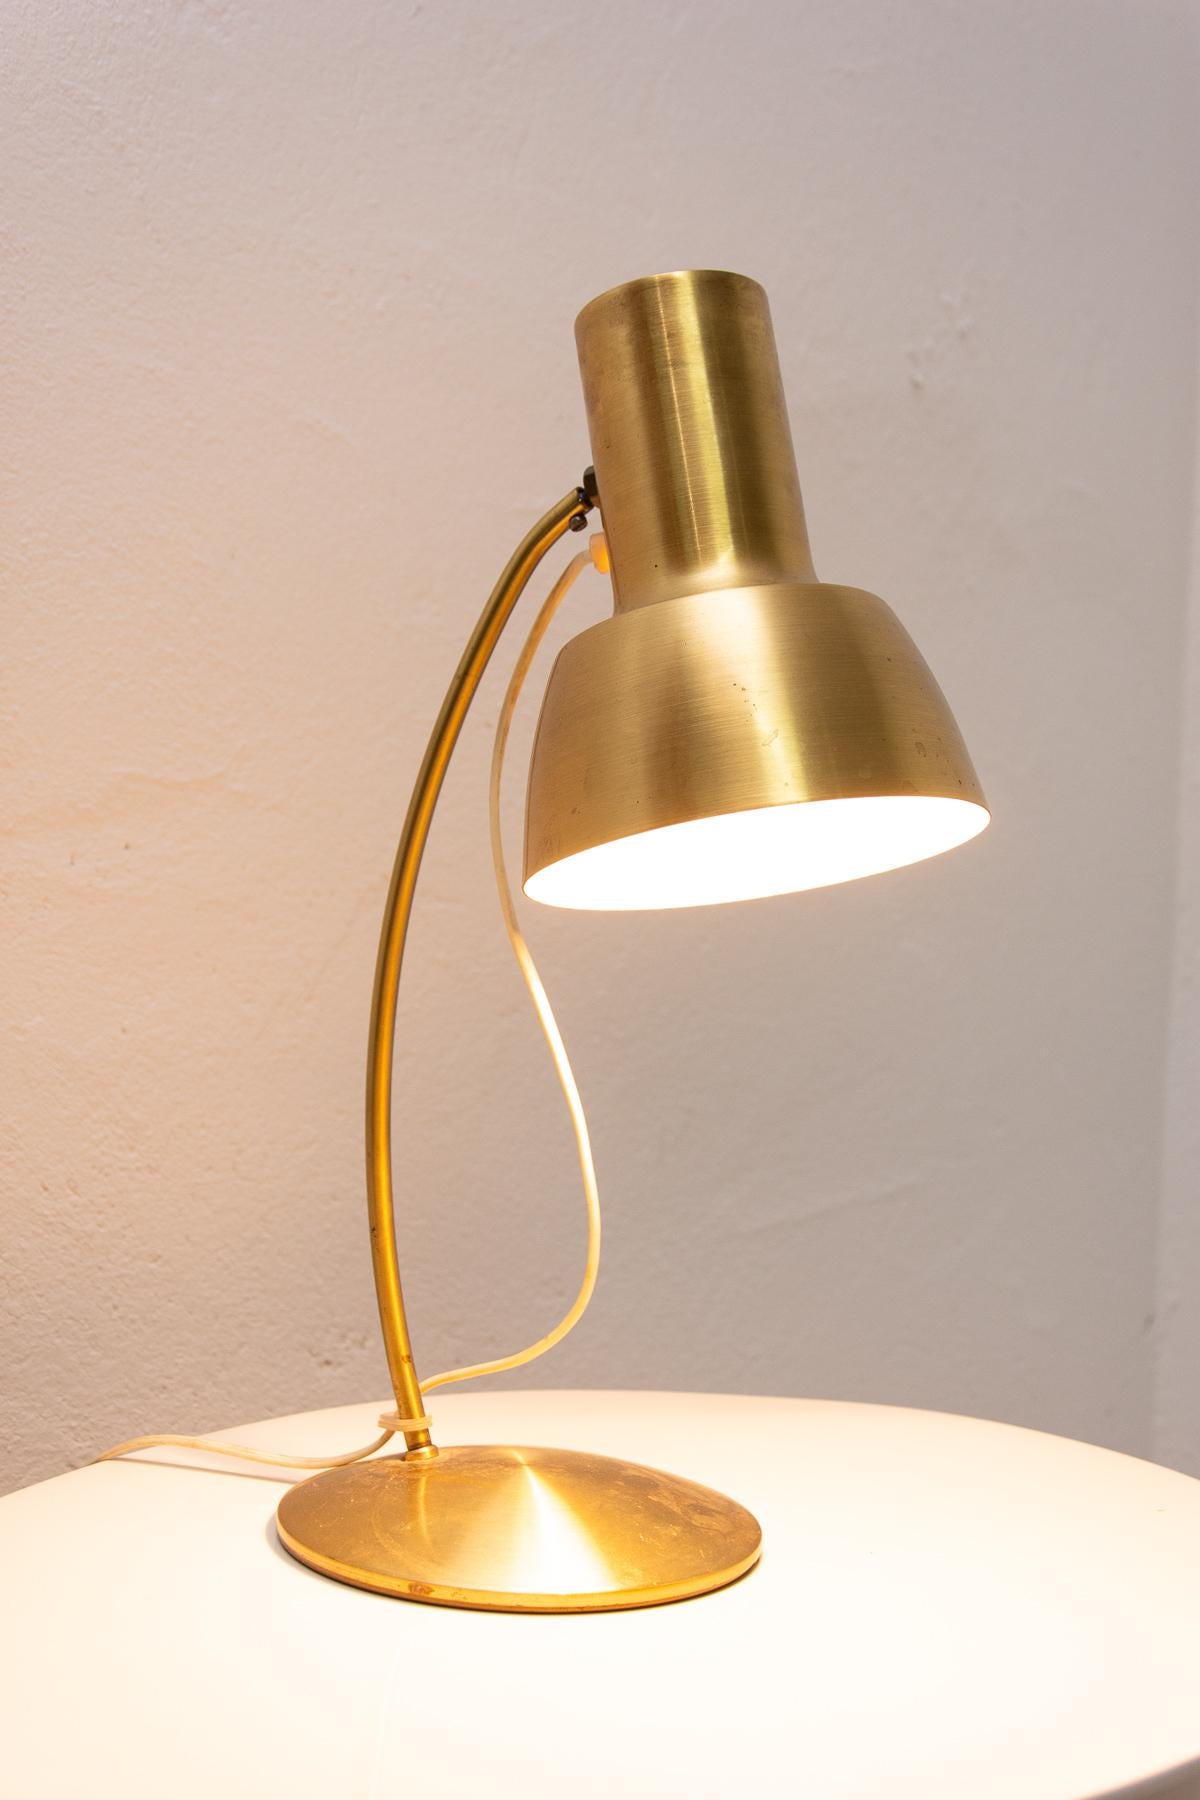 Midcentury table lamp, associated with “Brussels period” and world-renowned EXPO58. It was made in the former Czechoslovakia in the 1960s. Painted in gold color. Material: metal, aluminum, plastic. In very good Vintage condition, fully functional,